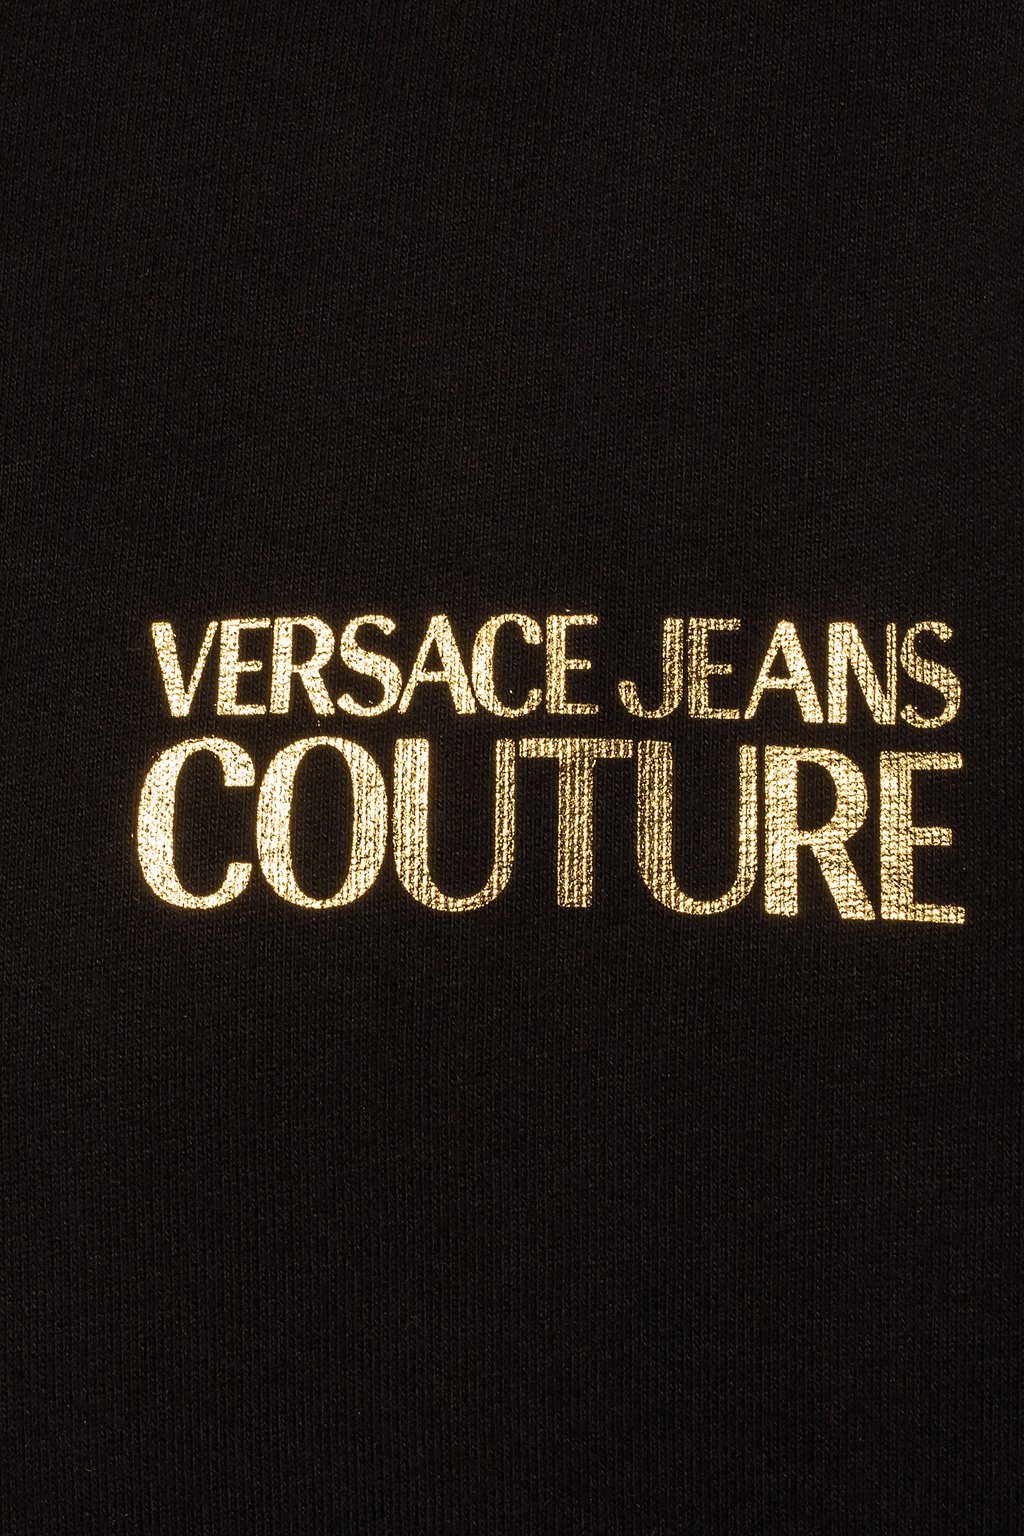 versace jeans couture logo